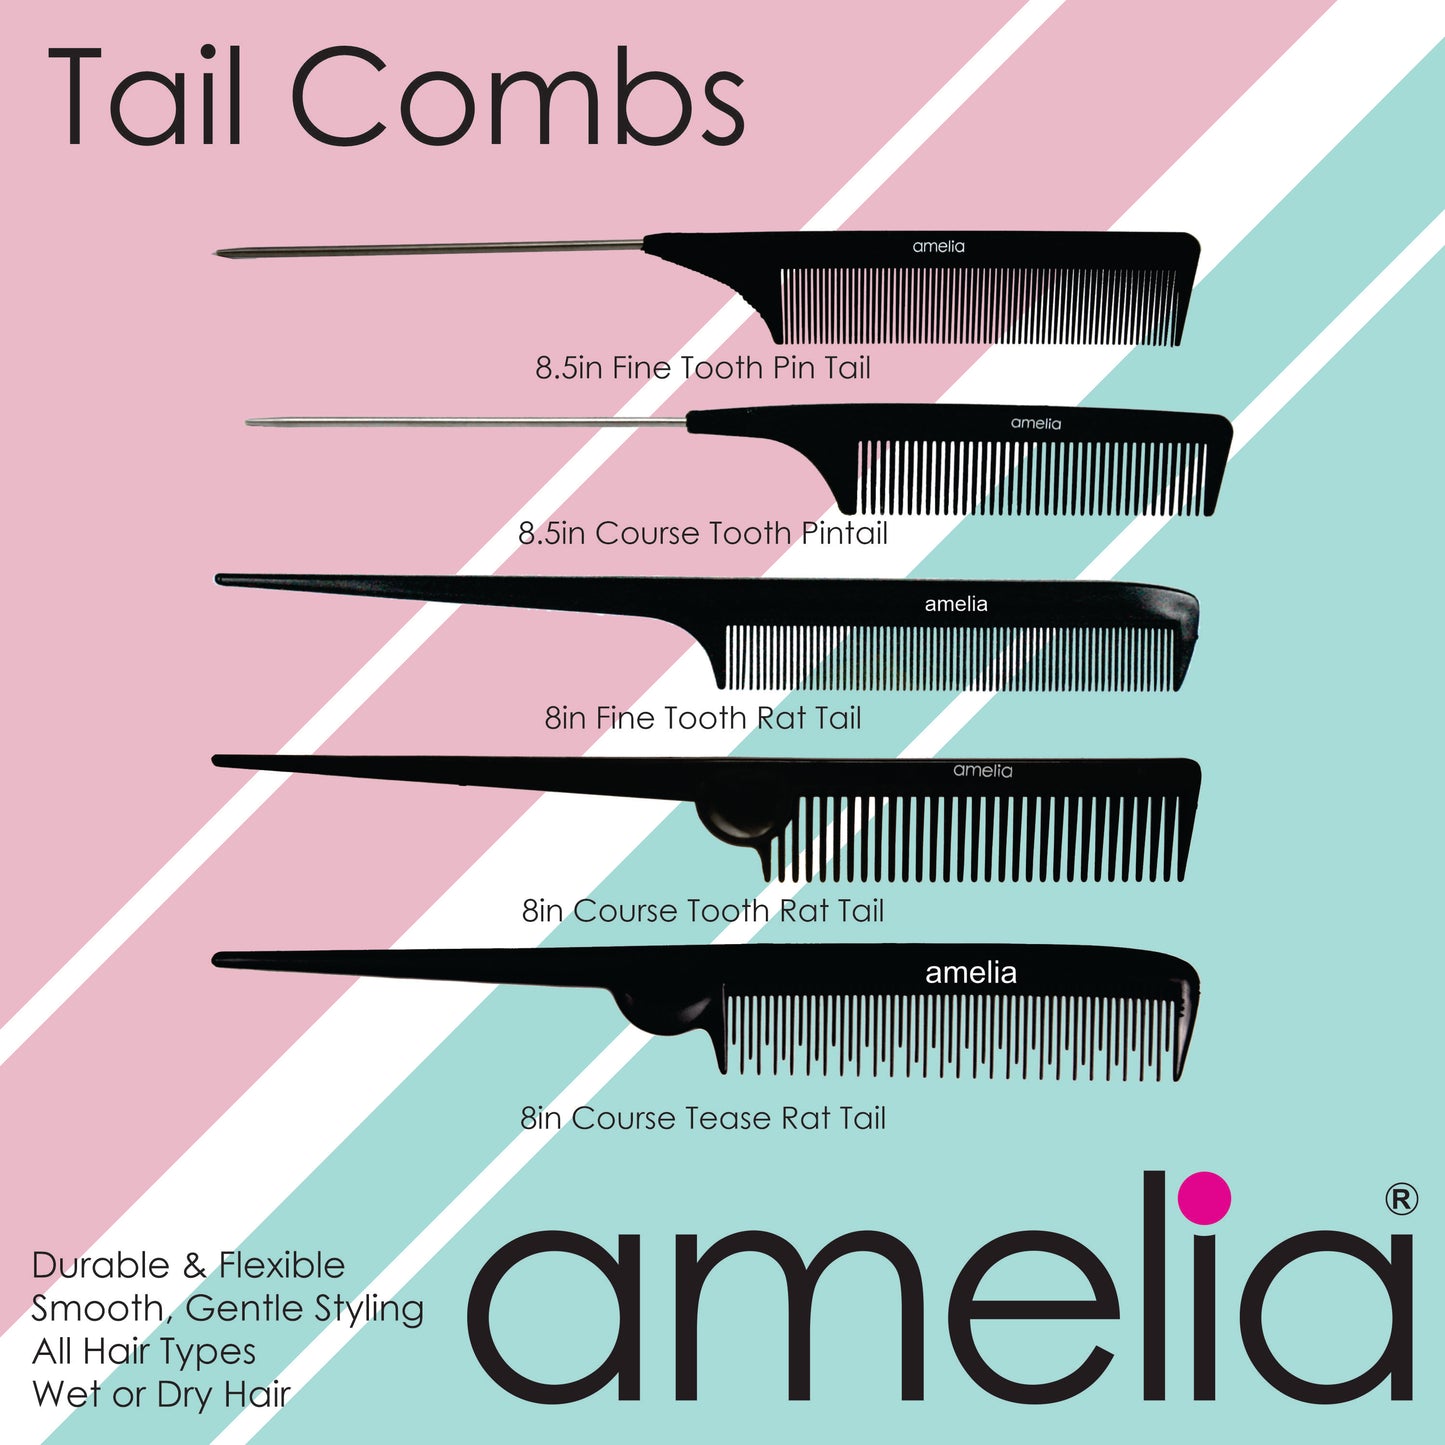 Amelia Beauty, 9in Black Plastic Pin Stainless Tail Fine Tooth, Professional Grade Hair Comb, For Highlighting, Sectioning & Styling Hair with Pin Tip, Wet or Dry, 9"x1", 2 Pack